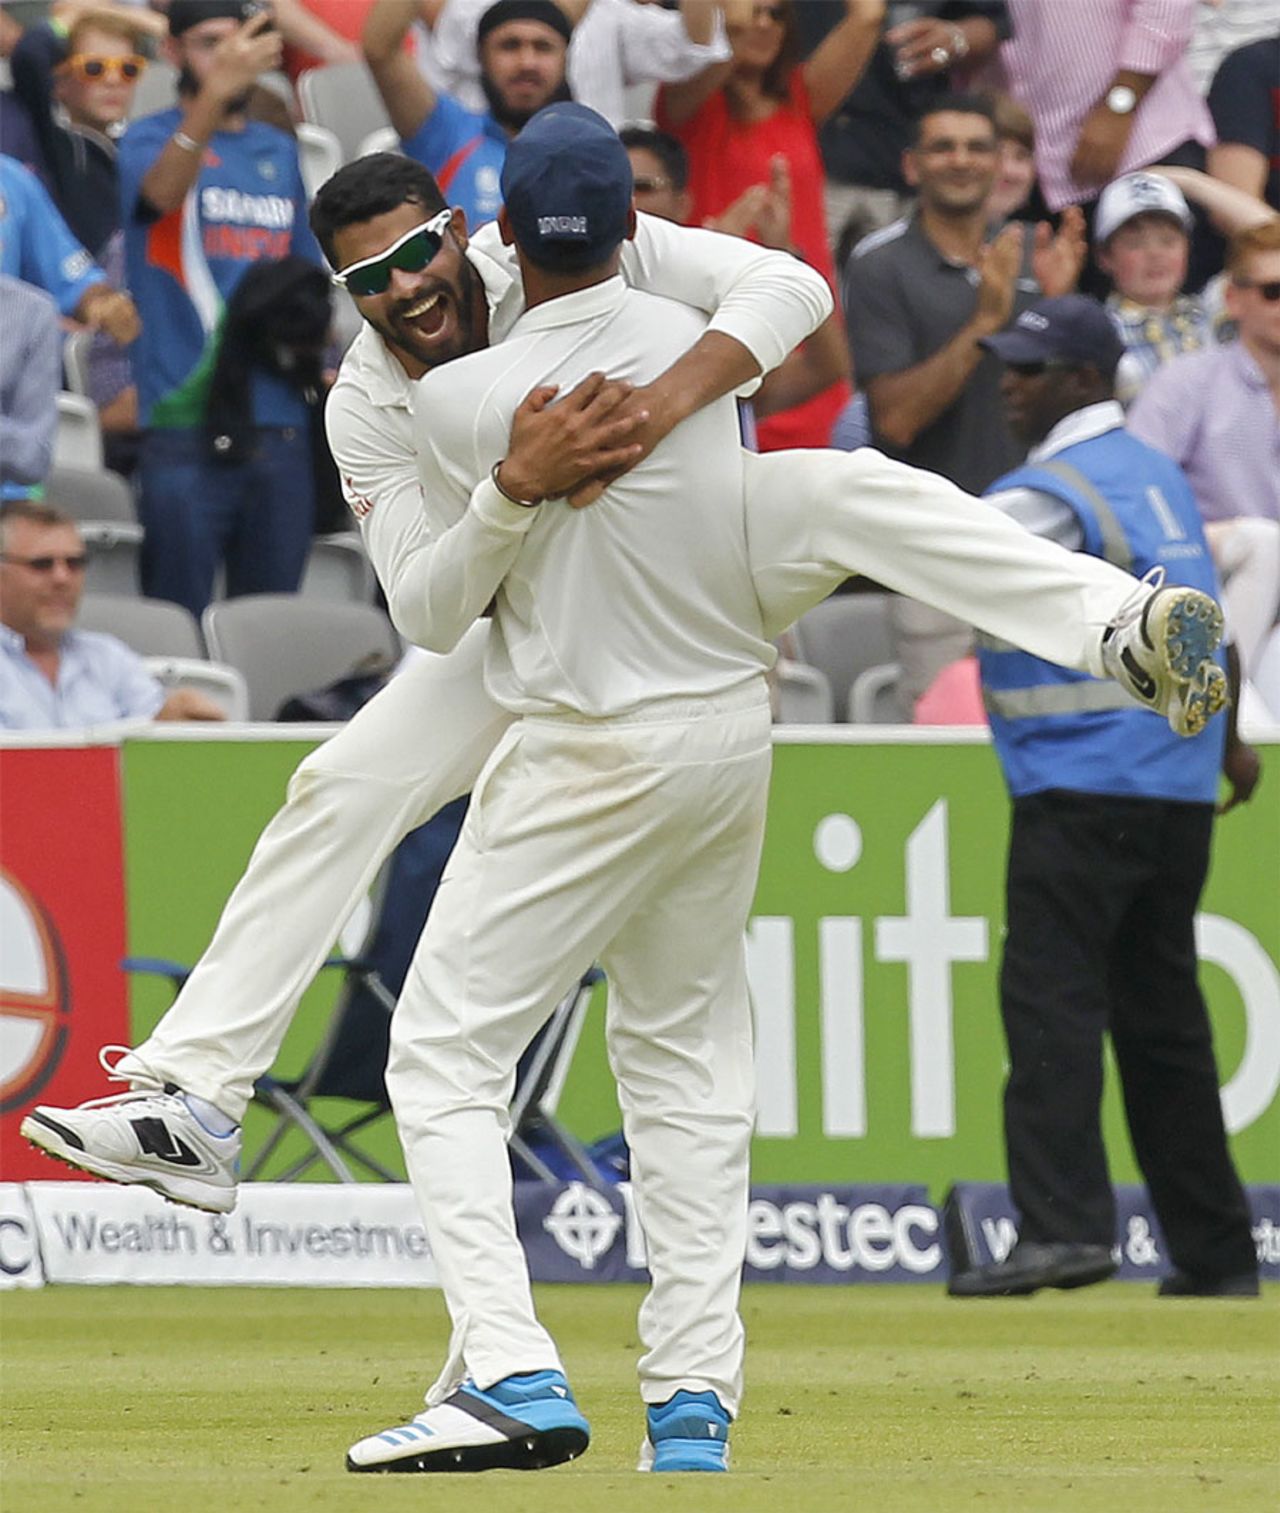 Ravindra Jadeja pounces on a team-mate during the celebrations, England v India, 2nd Investec Test, Lord's, 5th day, July 21, 2014